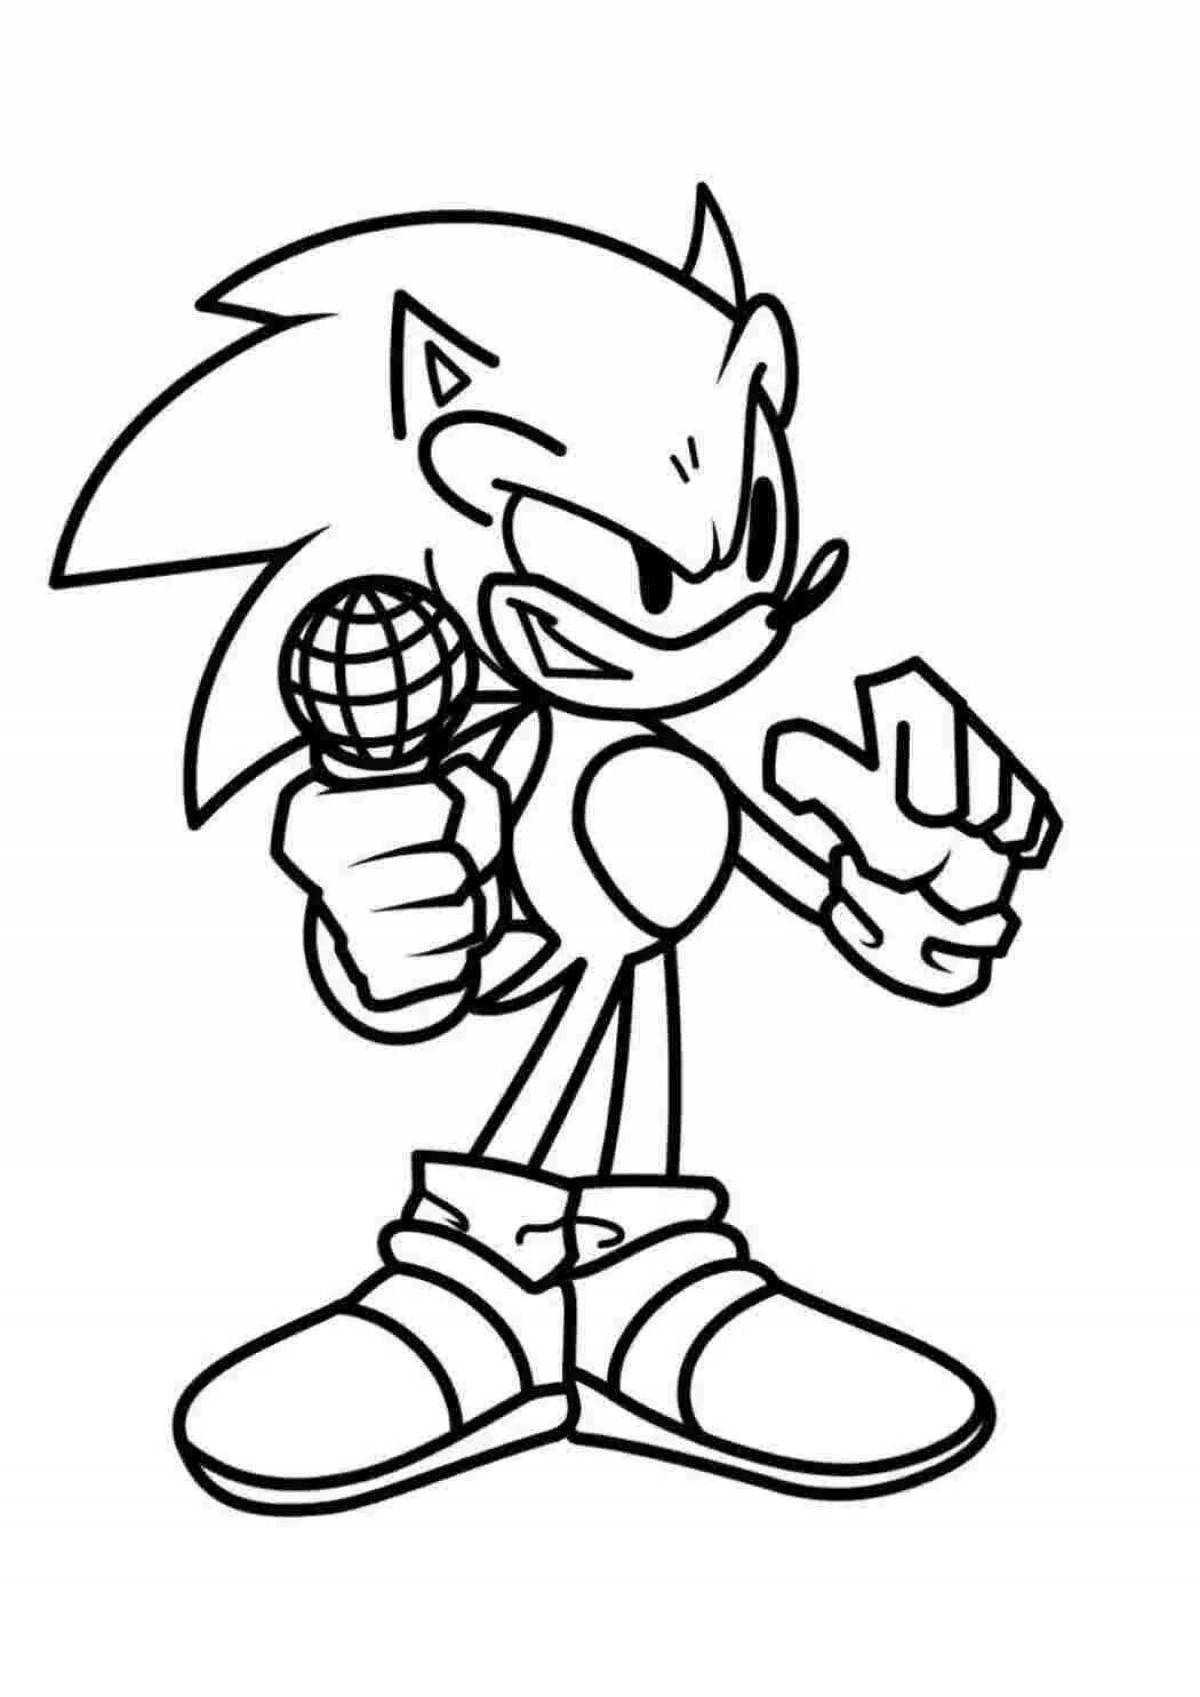 High color sonic in the car coloring page